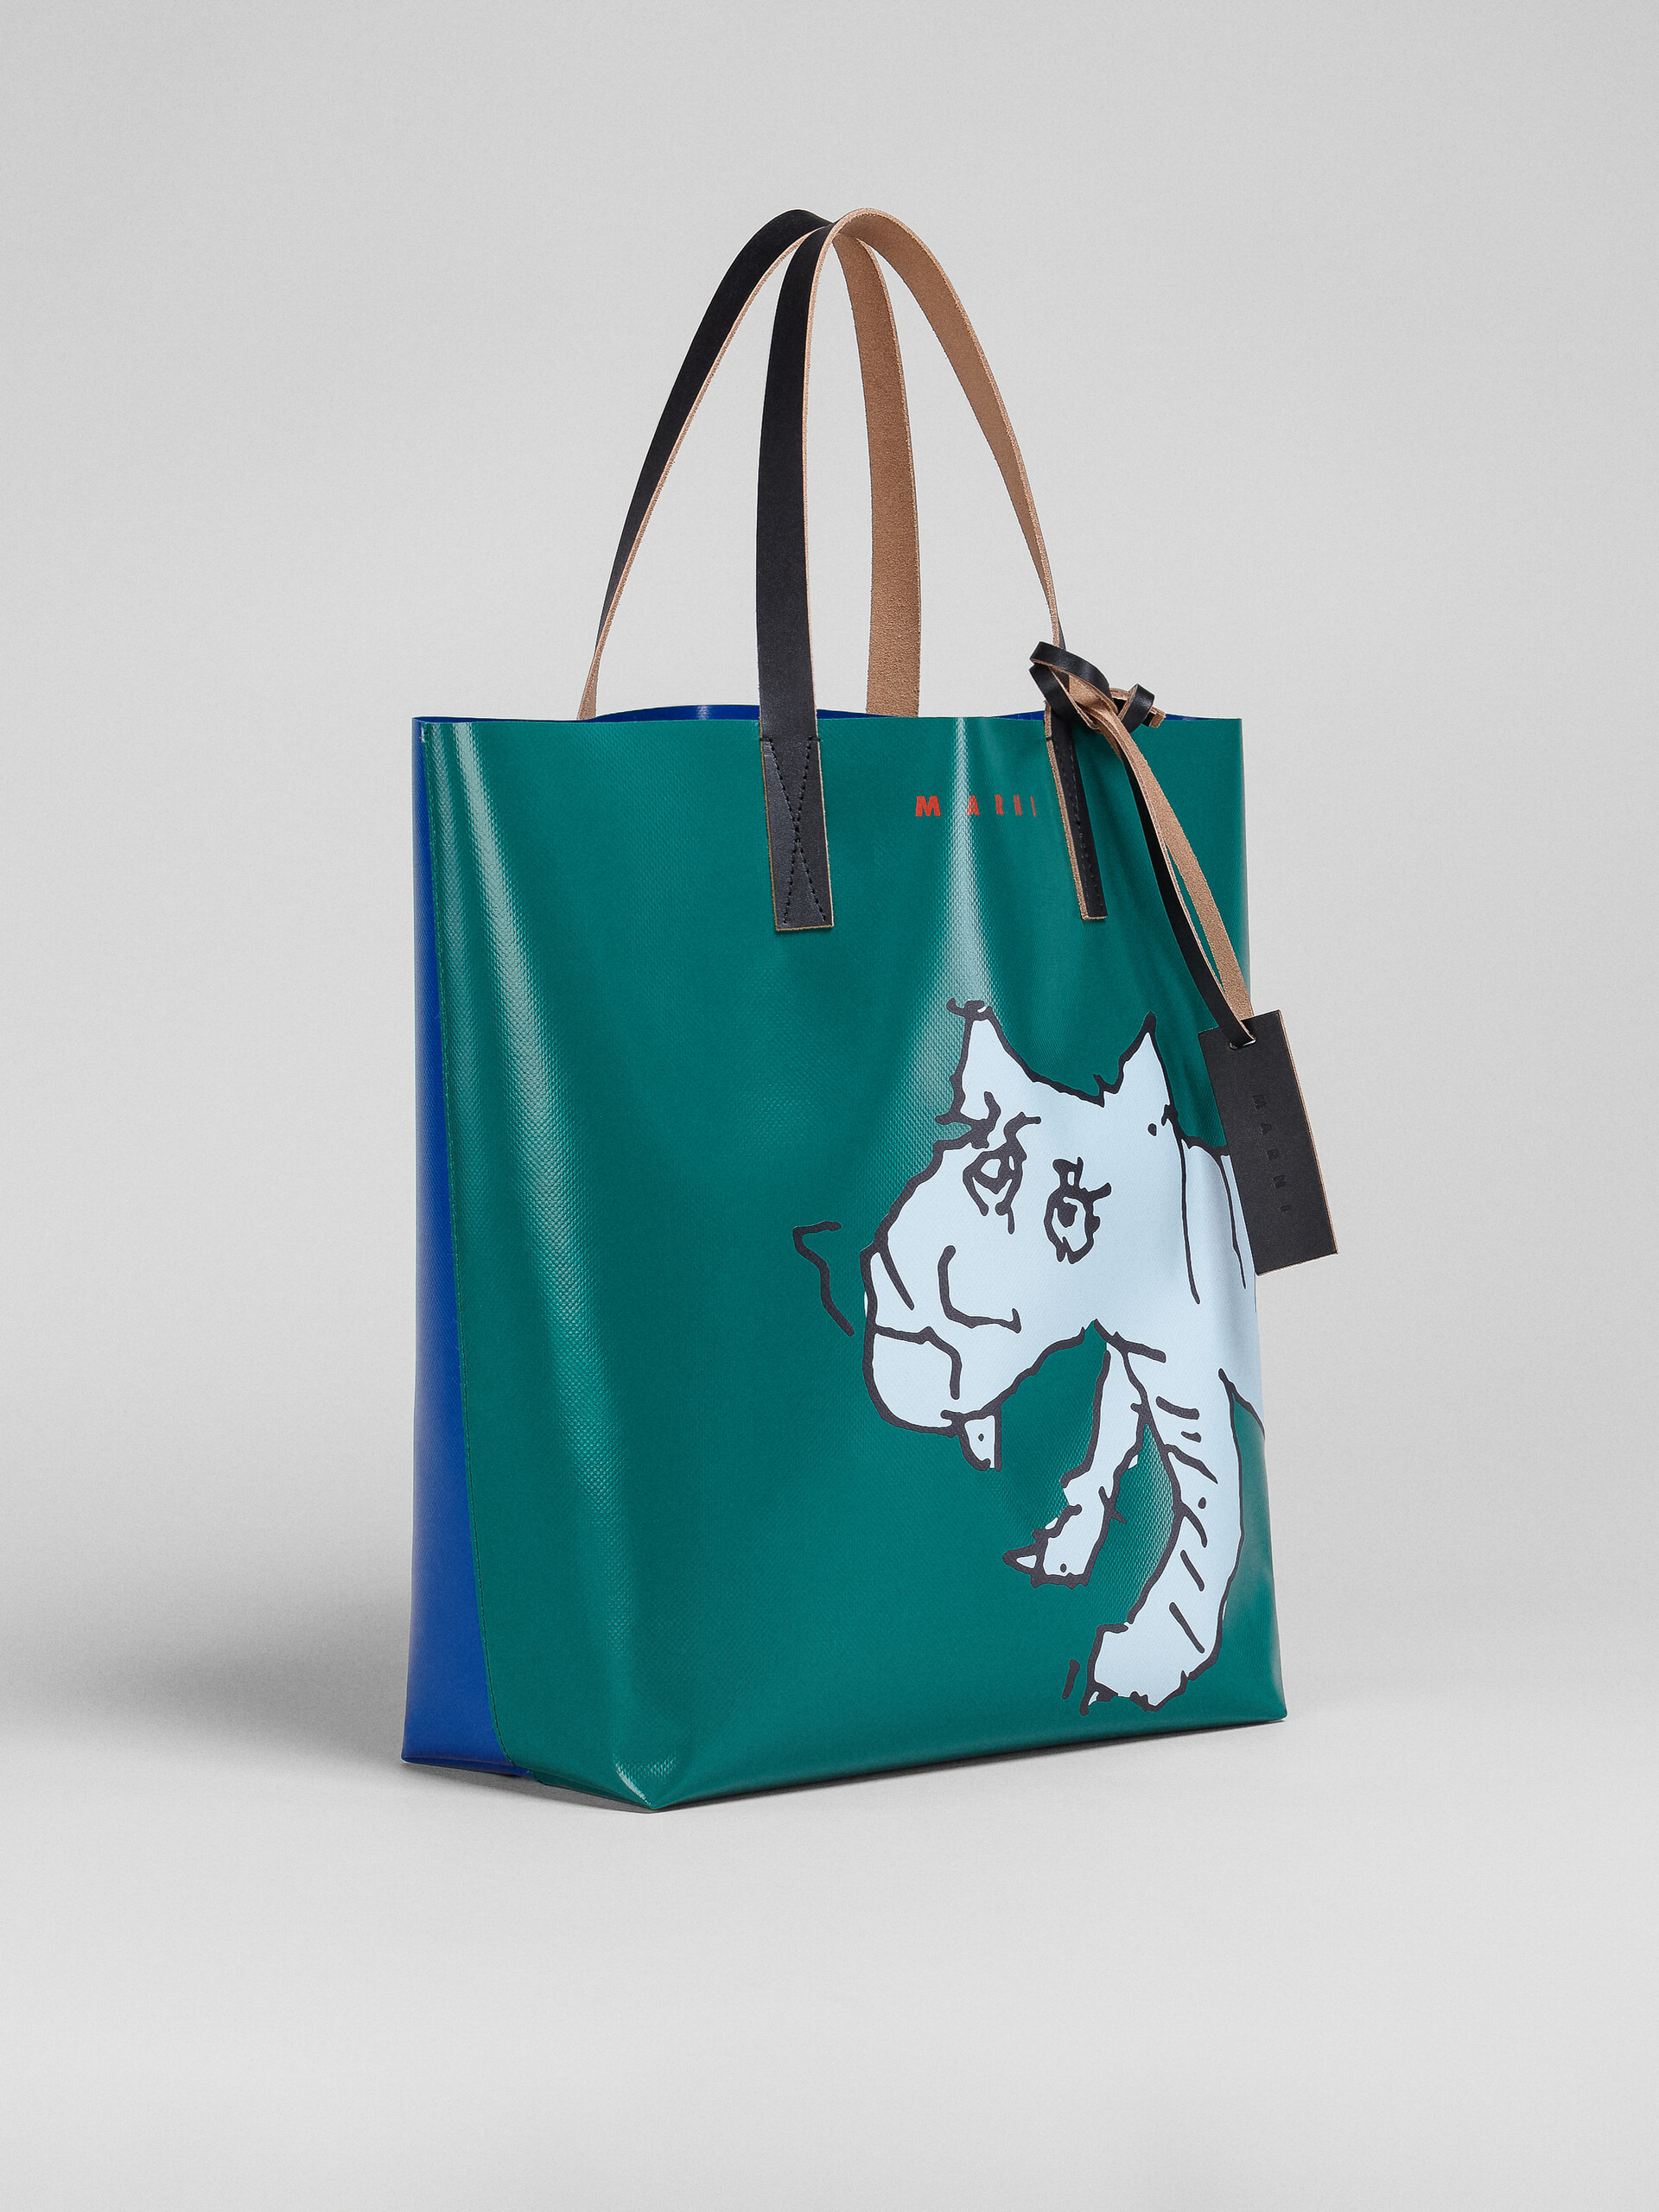 Green and blue TRIBECA bag in Tiger print - Shopping Bags - Image 6